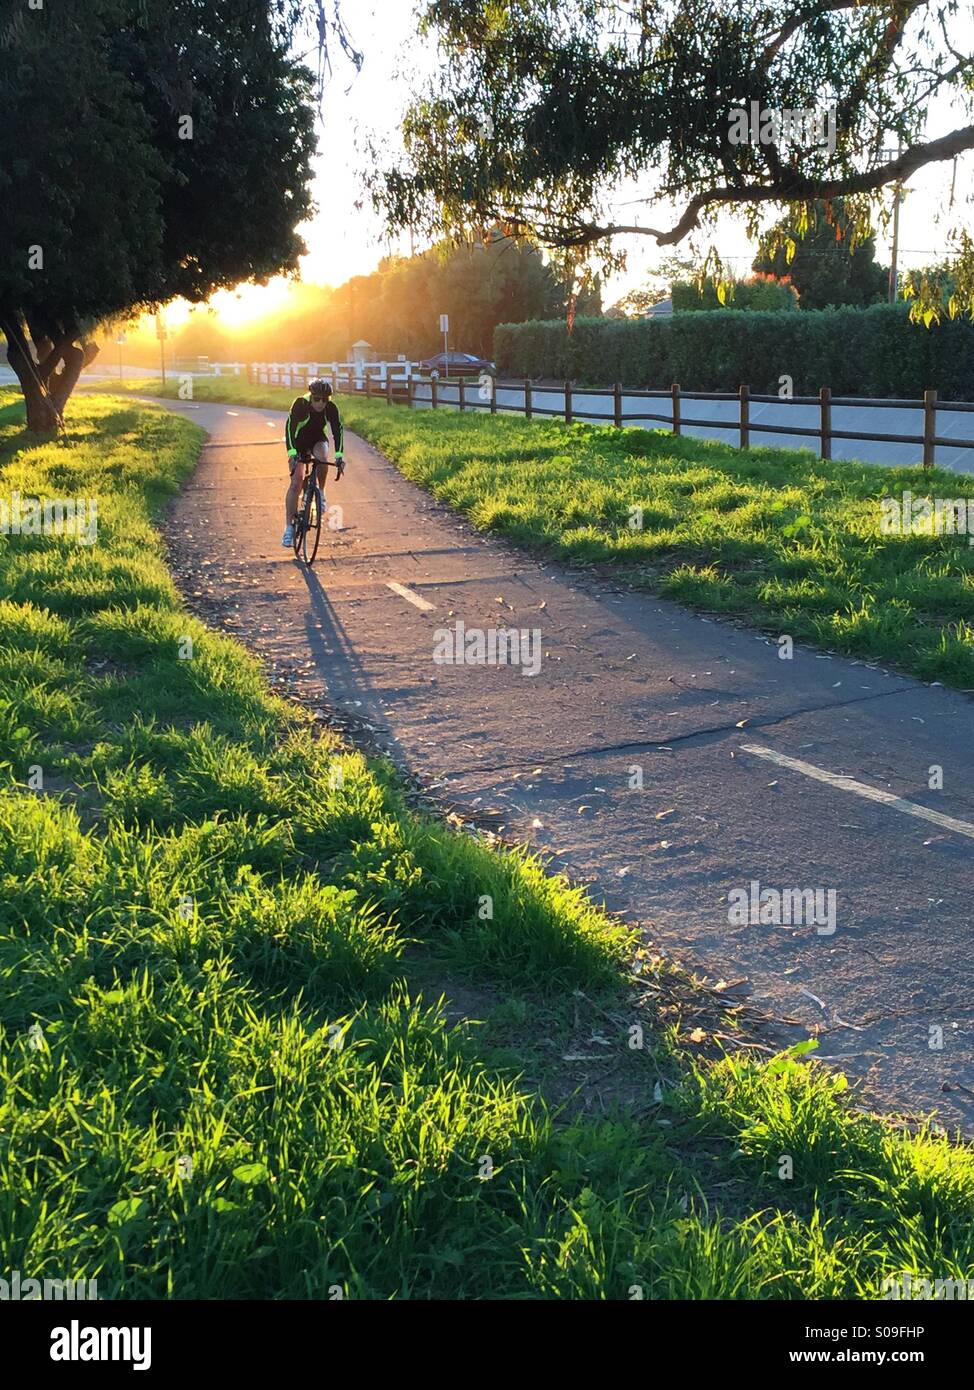 Adult bicyclist riding on bike path at dusk with long shadow and golden light. Stock Photo